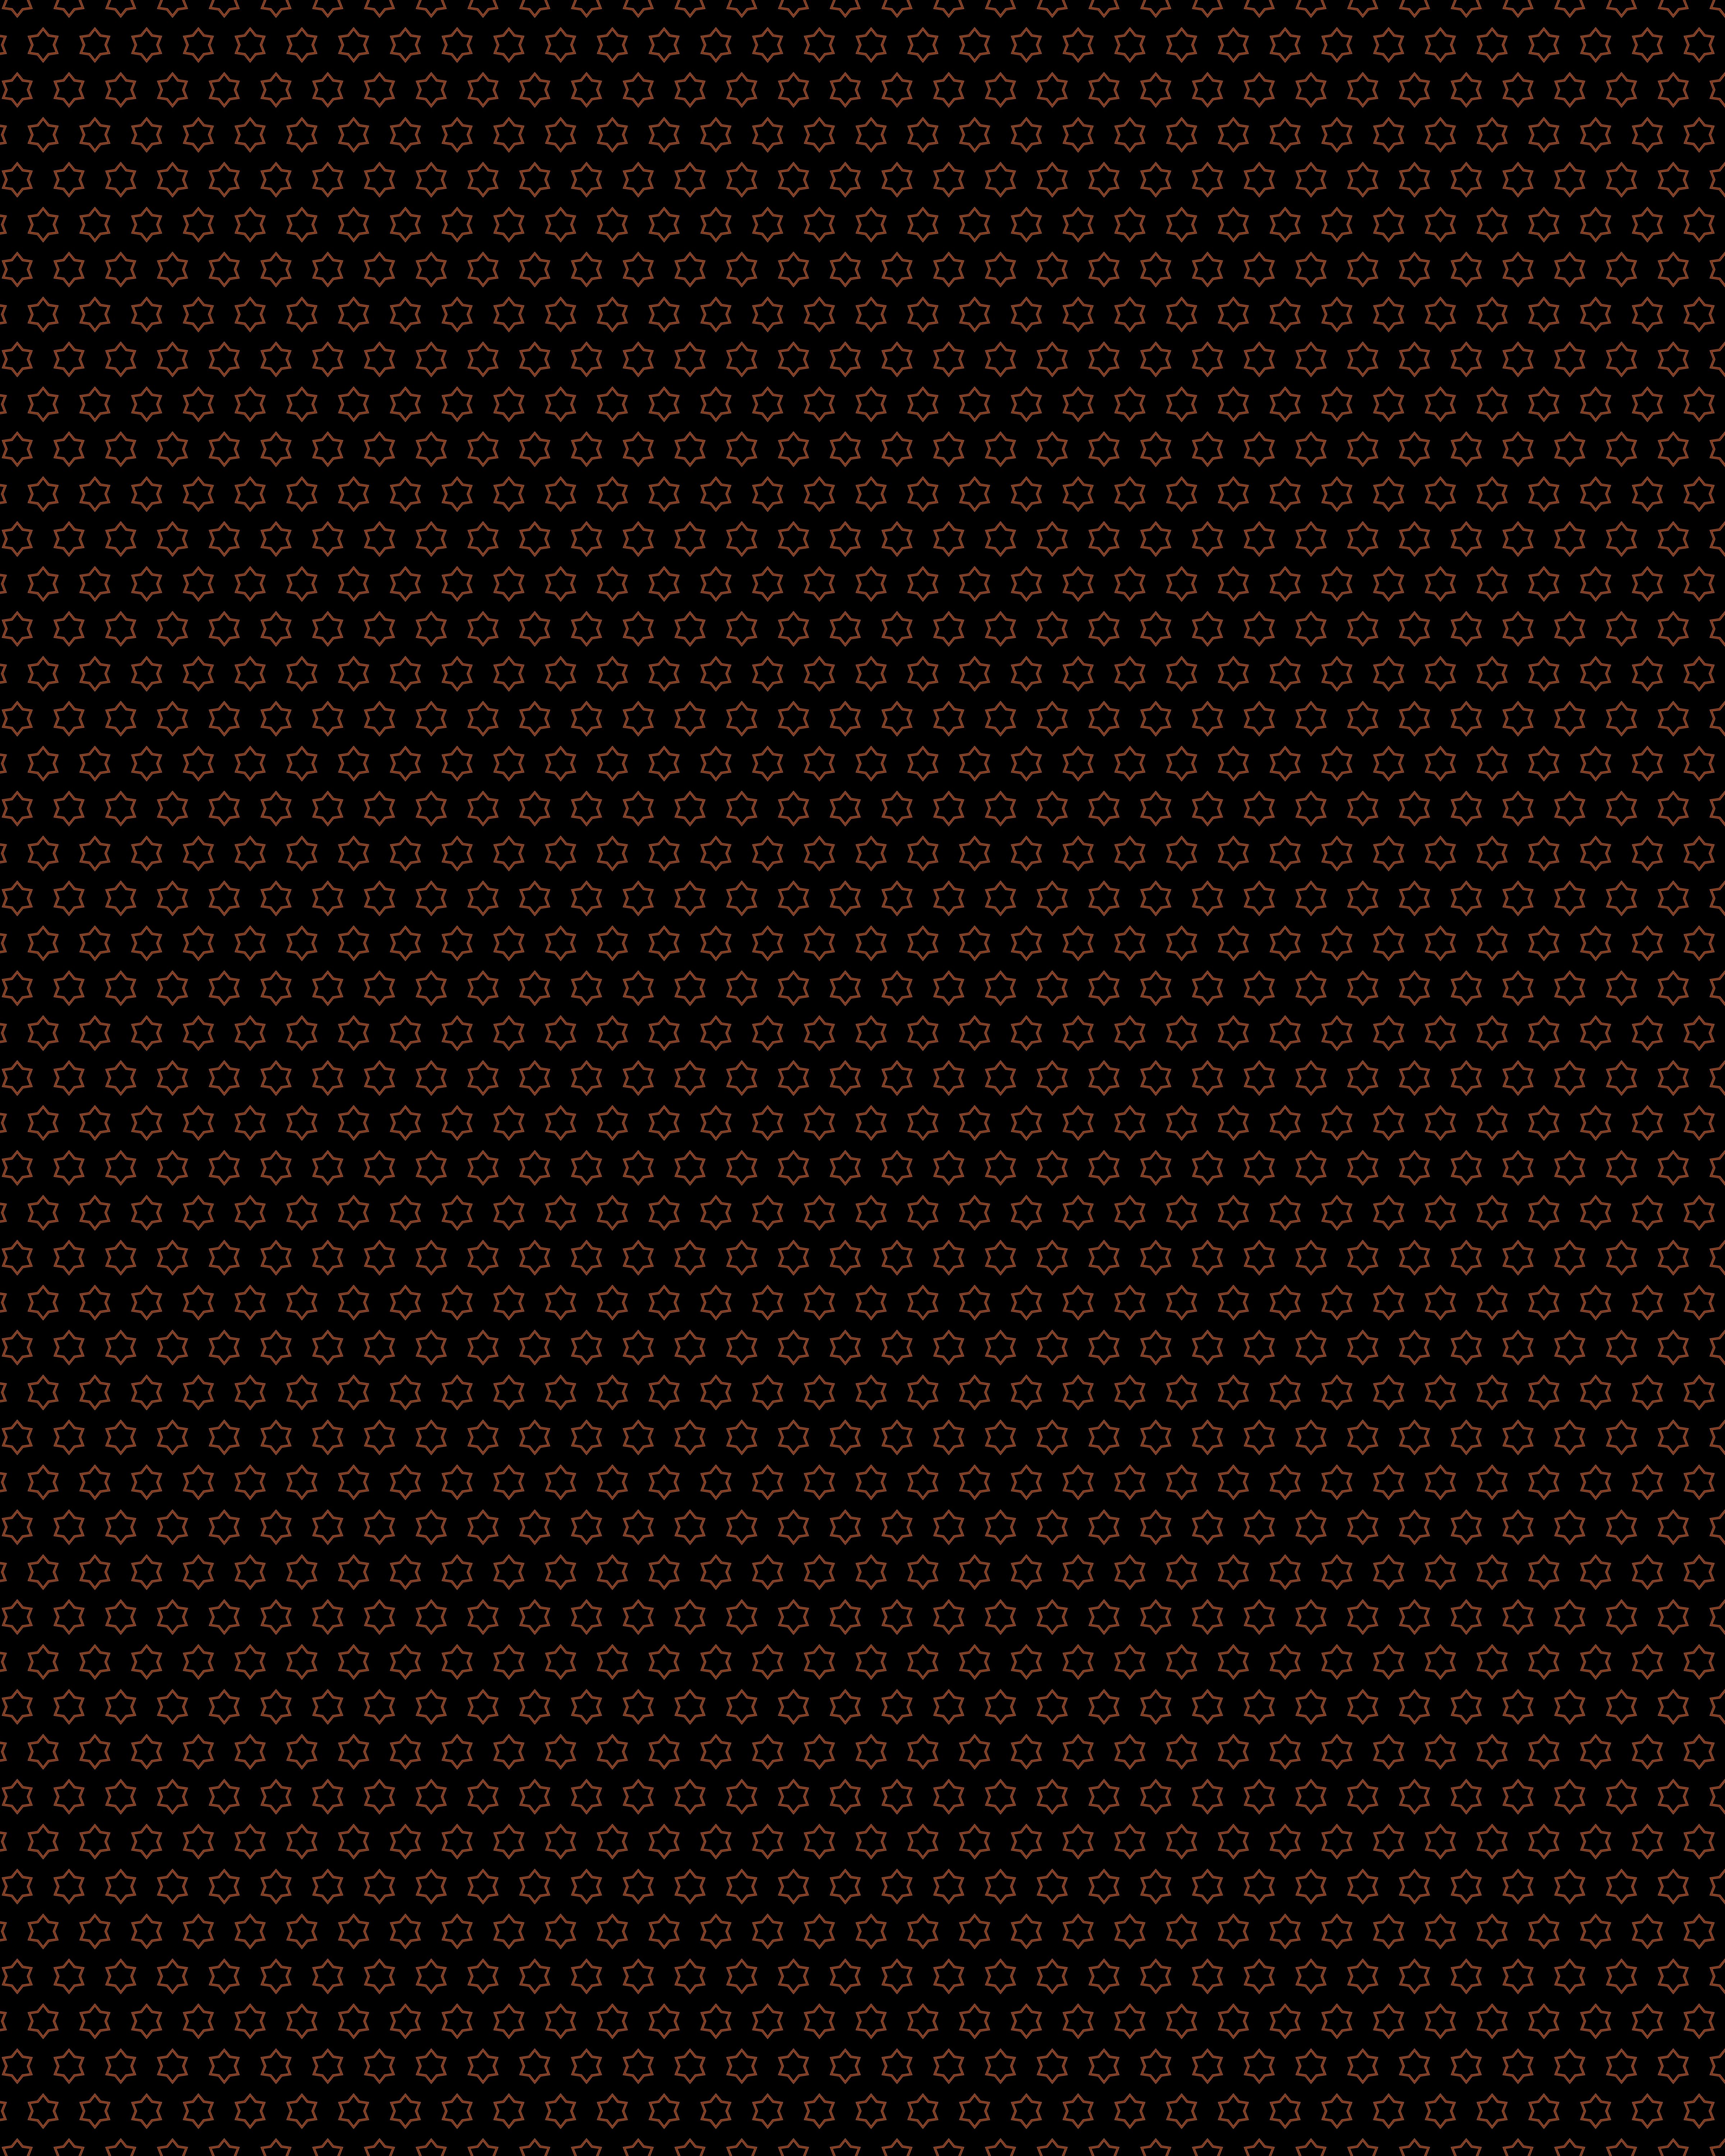 51205 download wallpaper black background, stars, pattern, texture, textures, brown, shallow, geometric, small screensavers and pictures for free